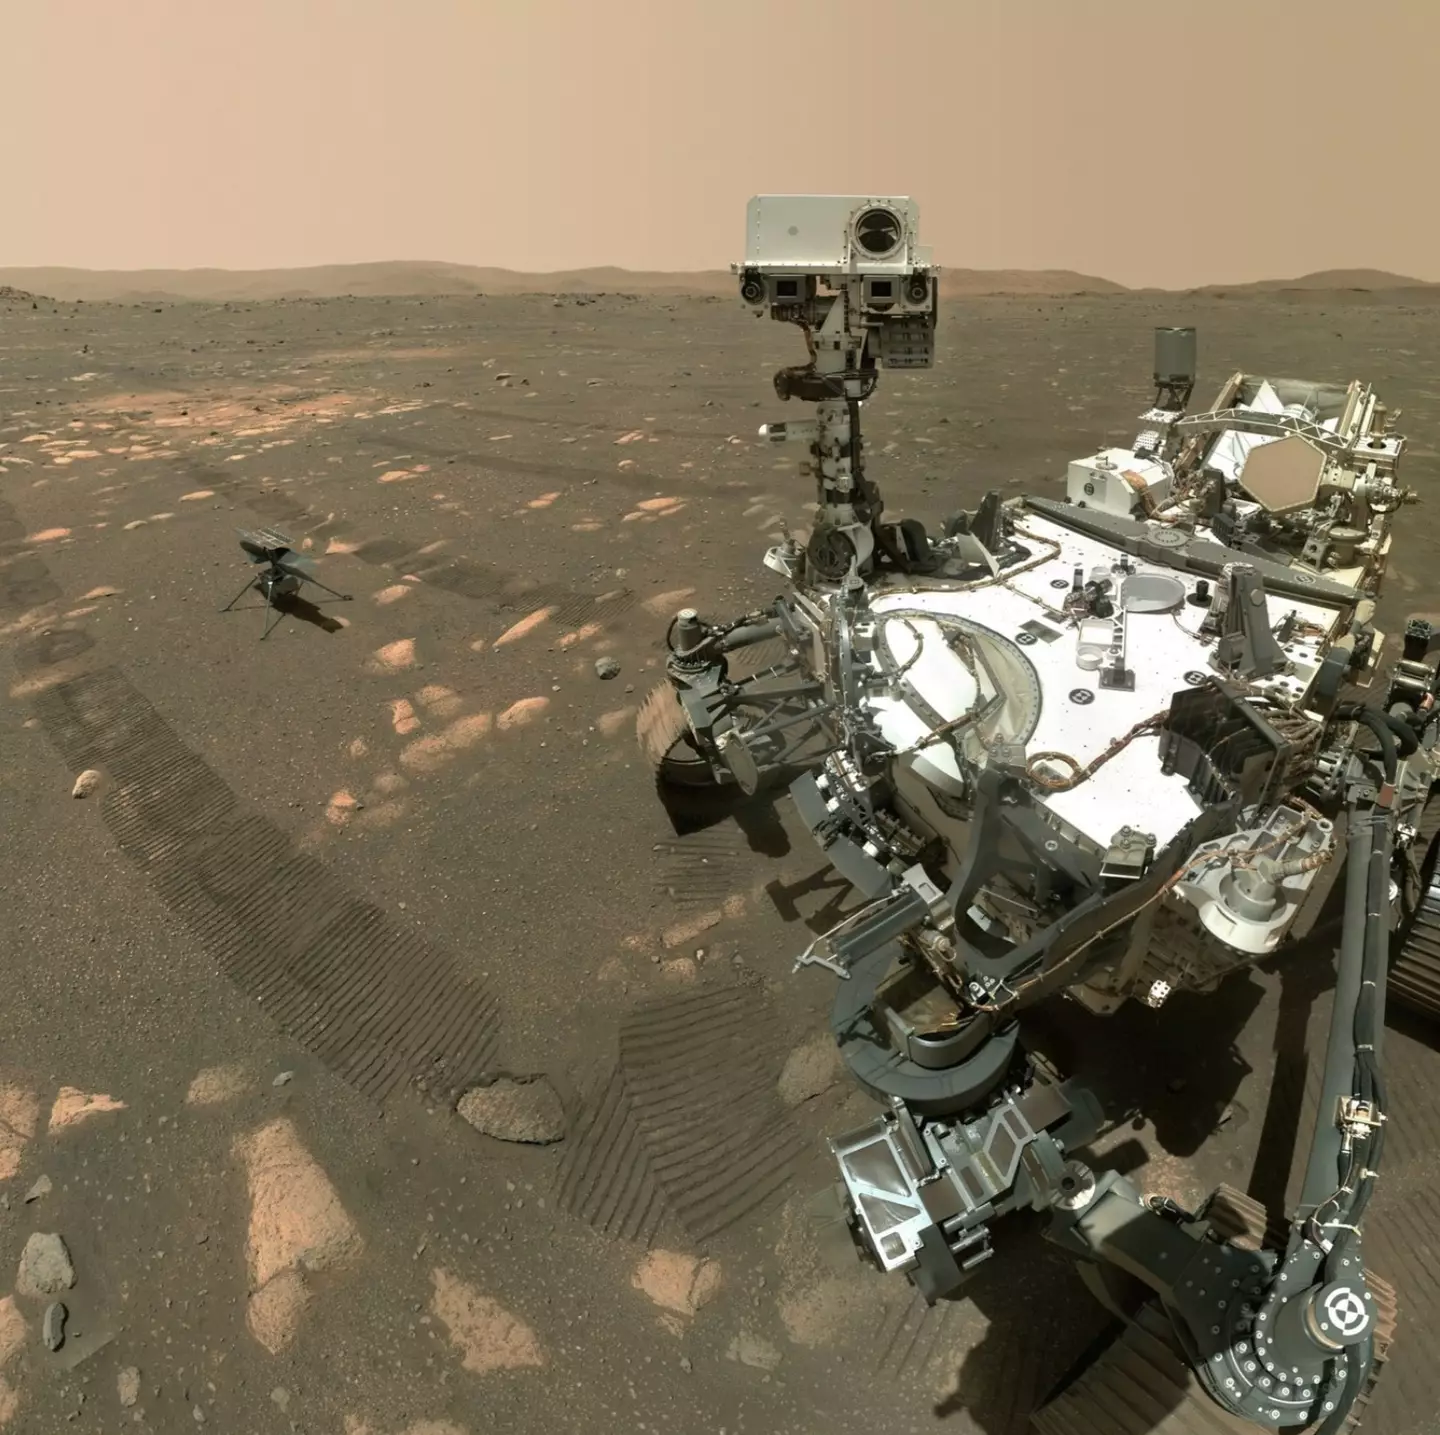 The Mars Rover has been exploring the surface of the Red Planet.